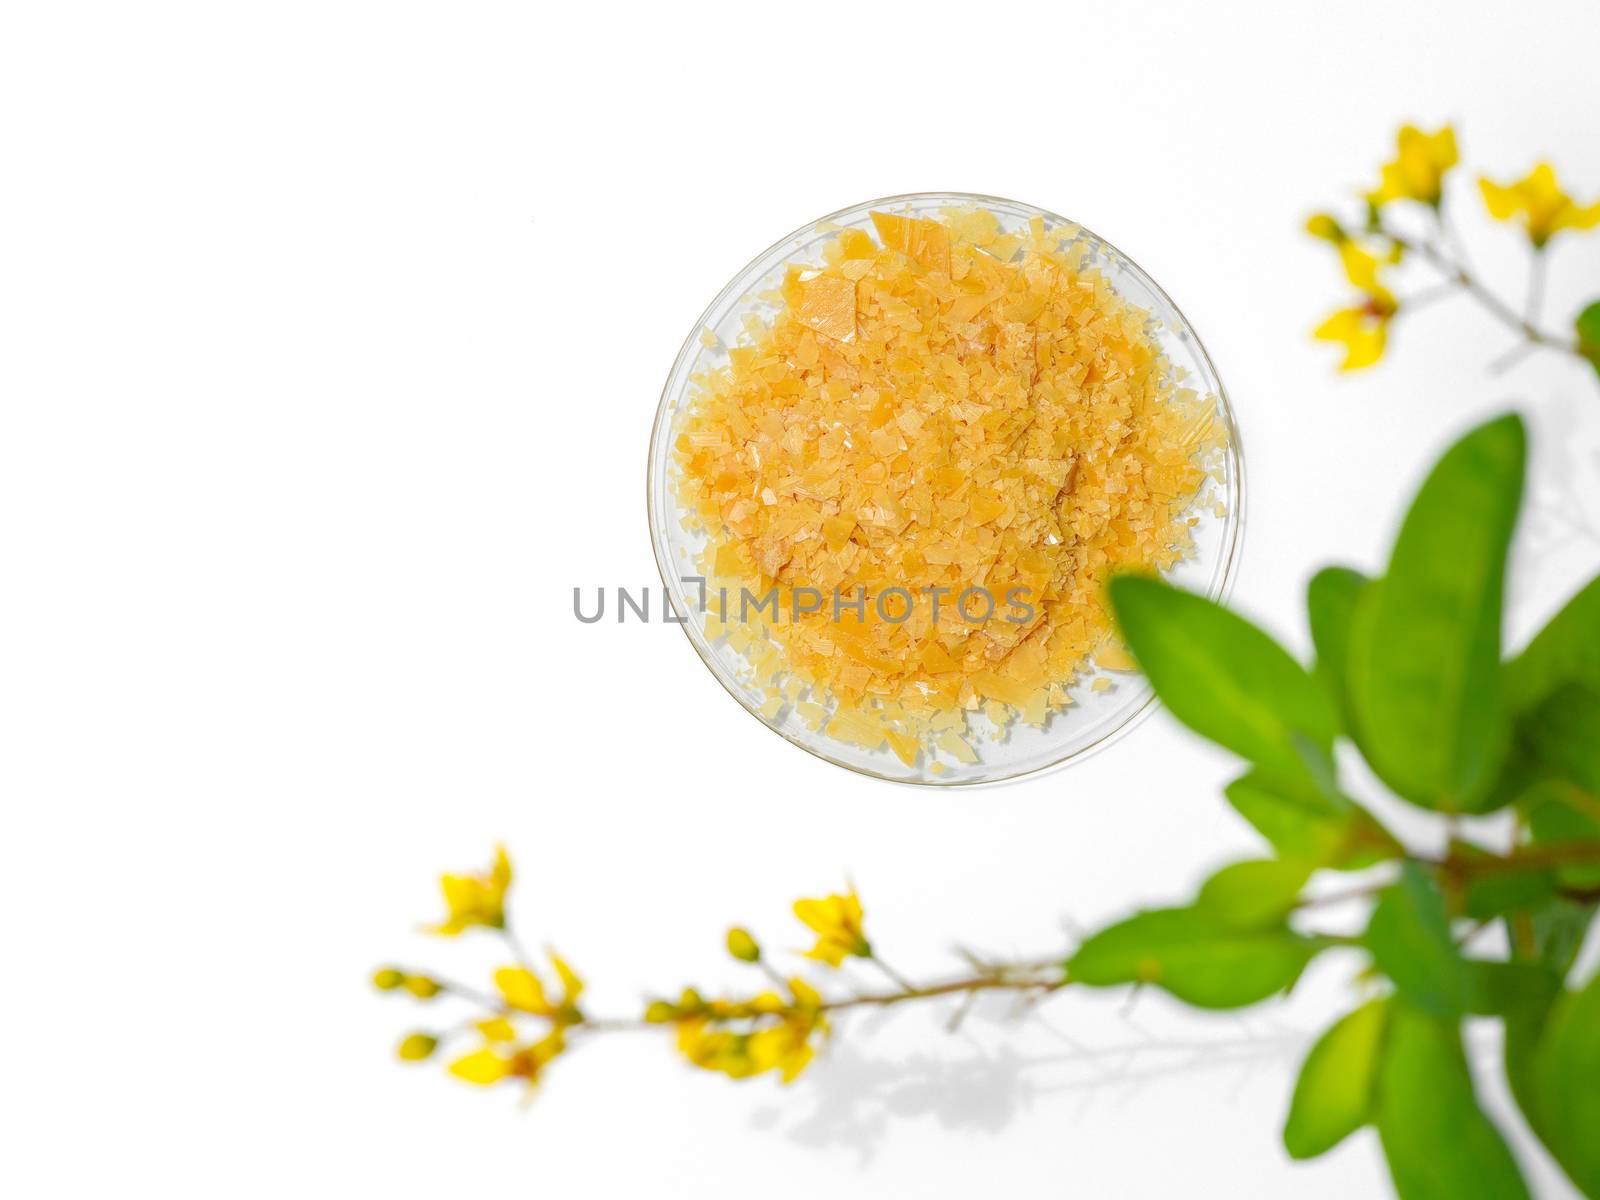 Organic Carnauba Wax comes in the form of hard yellow flakes and is widely used in cosmetics as an emulsifier or as a thickening agent for lipstick, eyeliner, mascara, eye shadow,foundation, deodorant